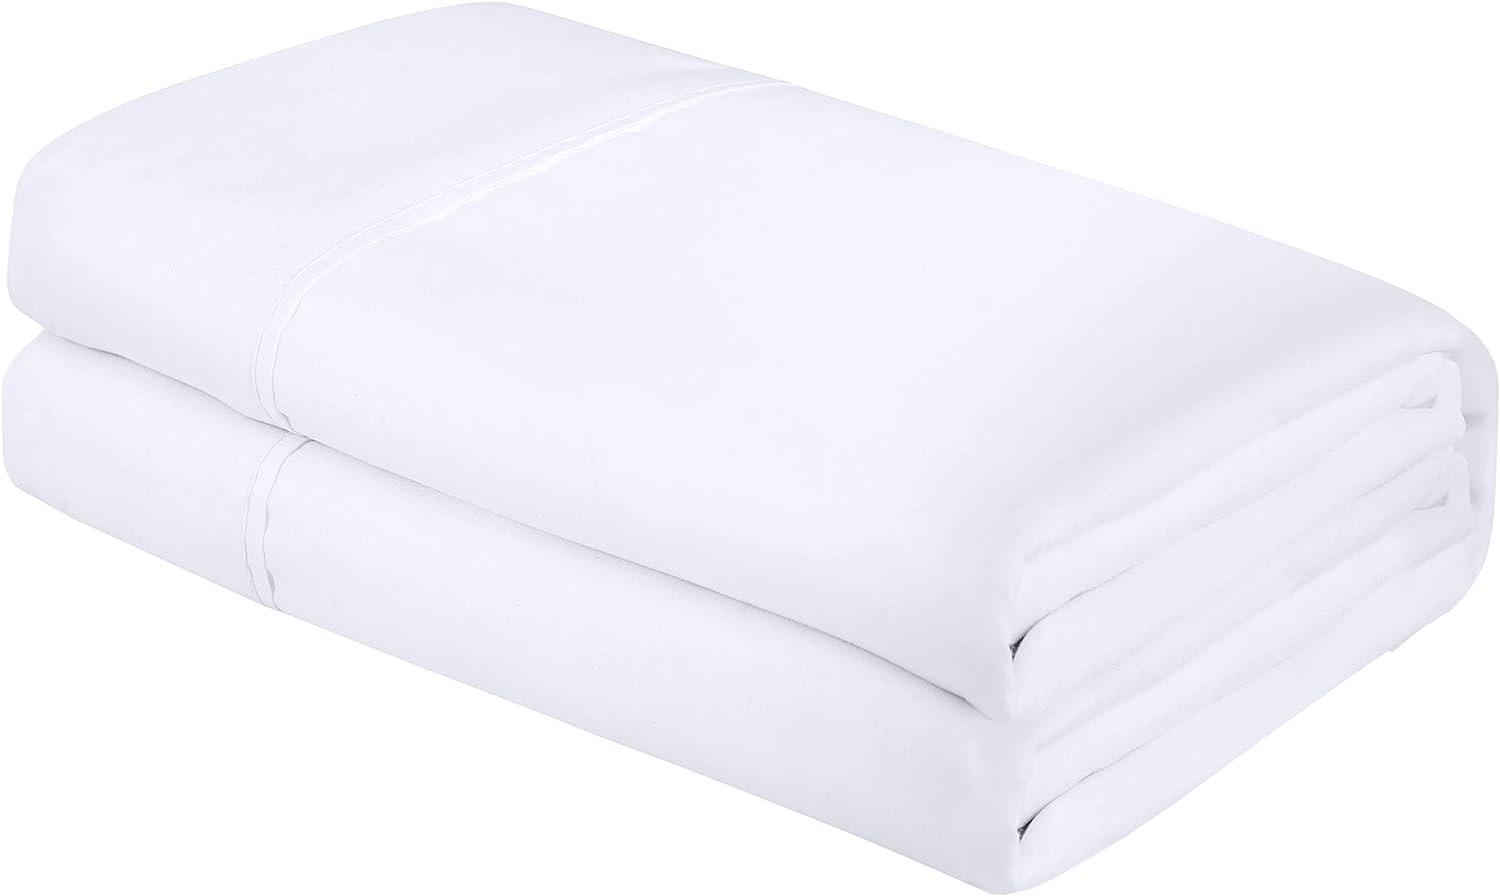 ROYALE LINENS Twin Size Flat Sheet Only - Ultra Soft & Breathable - Brushed 1800 Microfiber - Wrinkle & Stain Resistant - Hotel Quality Flat Sheet Sold Separately - Top Sheet for Bed - (Twin, White)